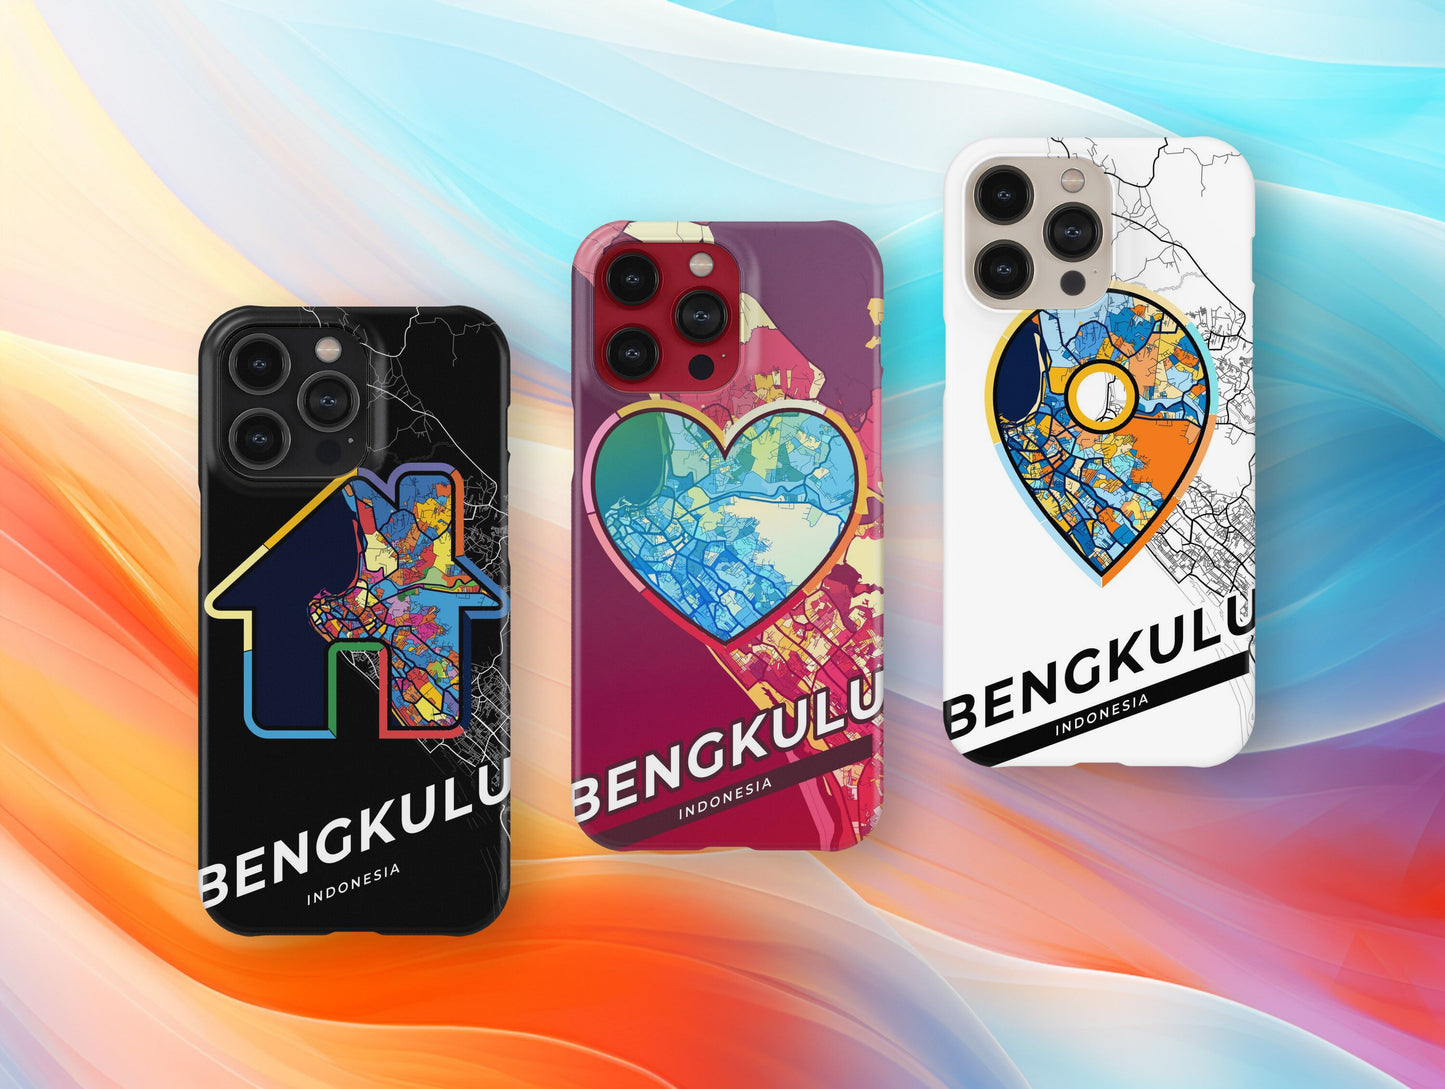 Bengkulu Indonesia slim phone case with colorful icon. Birthday, wedding or housewarming gift. Couple match cases.